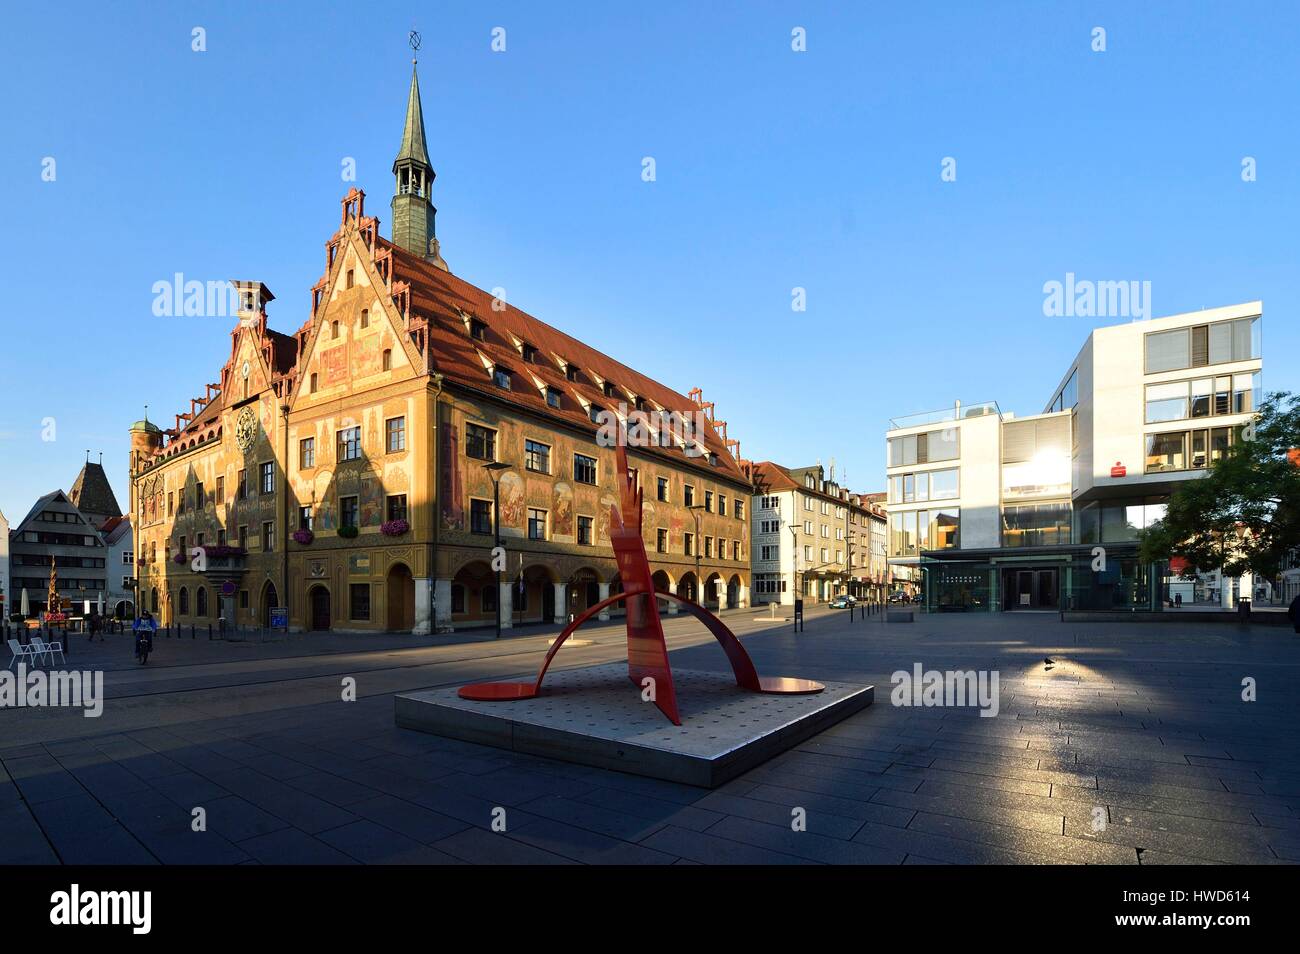 Germany, Bade Wurtemberg, Ulm, Albert Einstein' s birthplace, Rathaus (Town Hall) with Gothic style built in 1370 Stock Photo